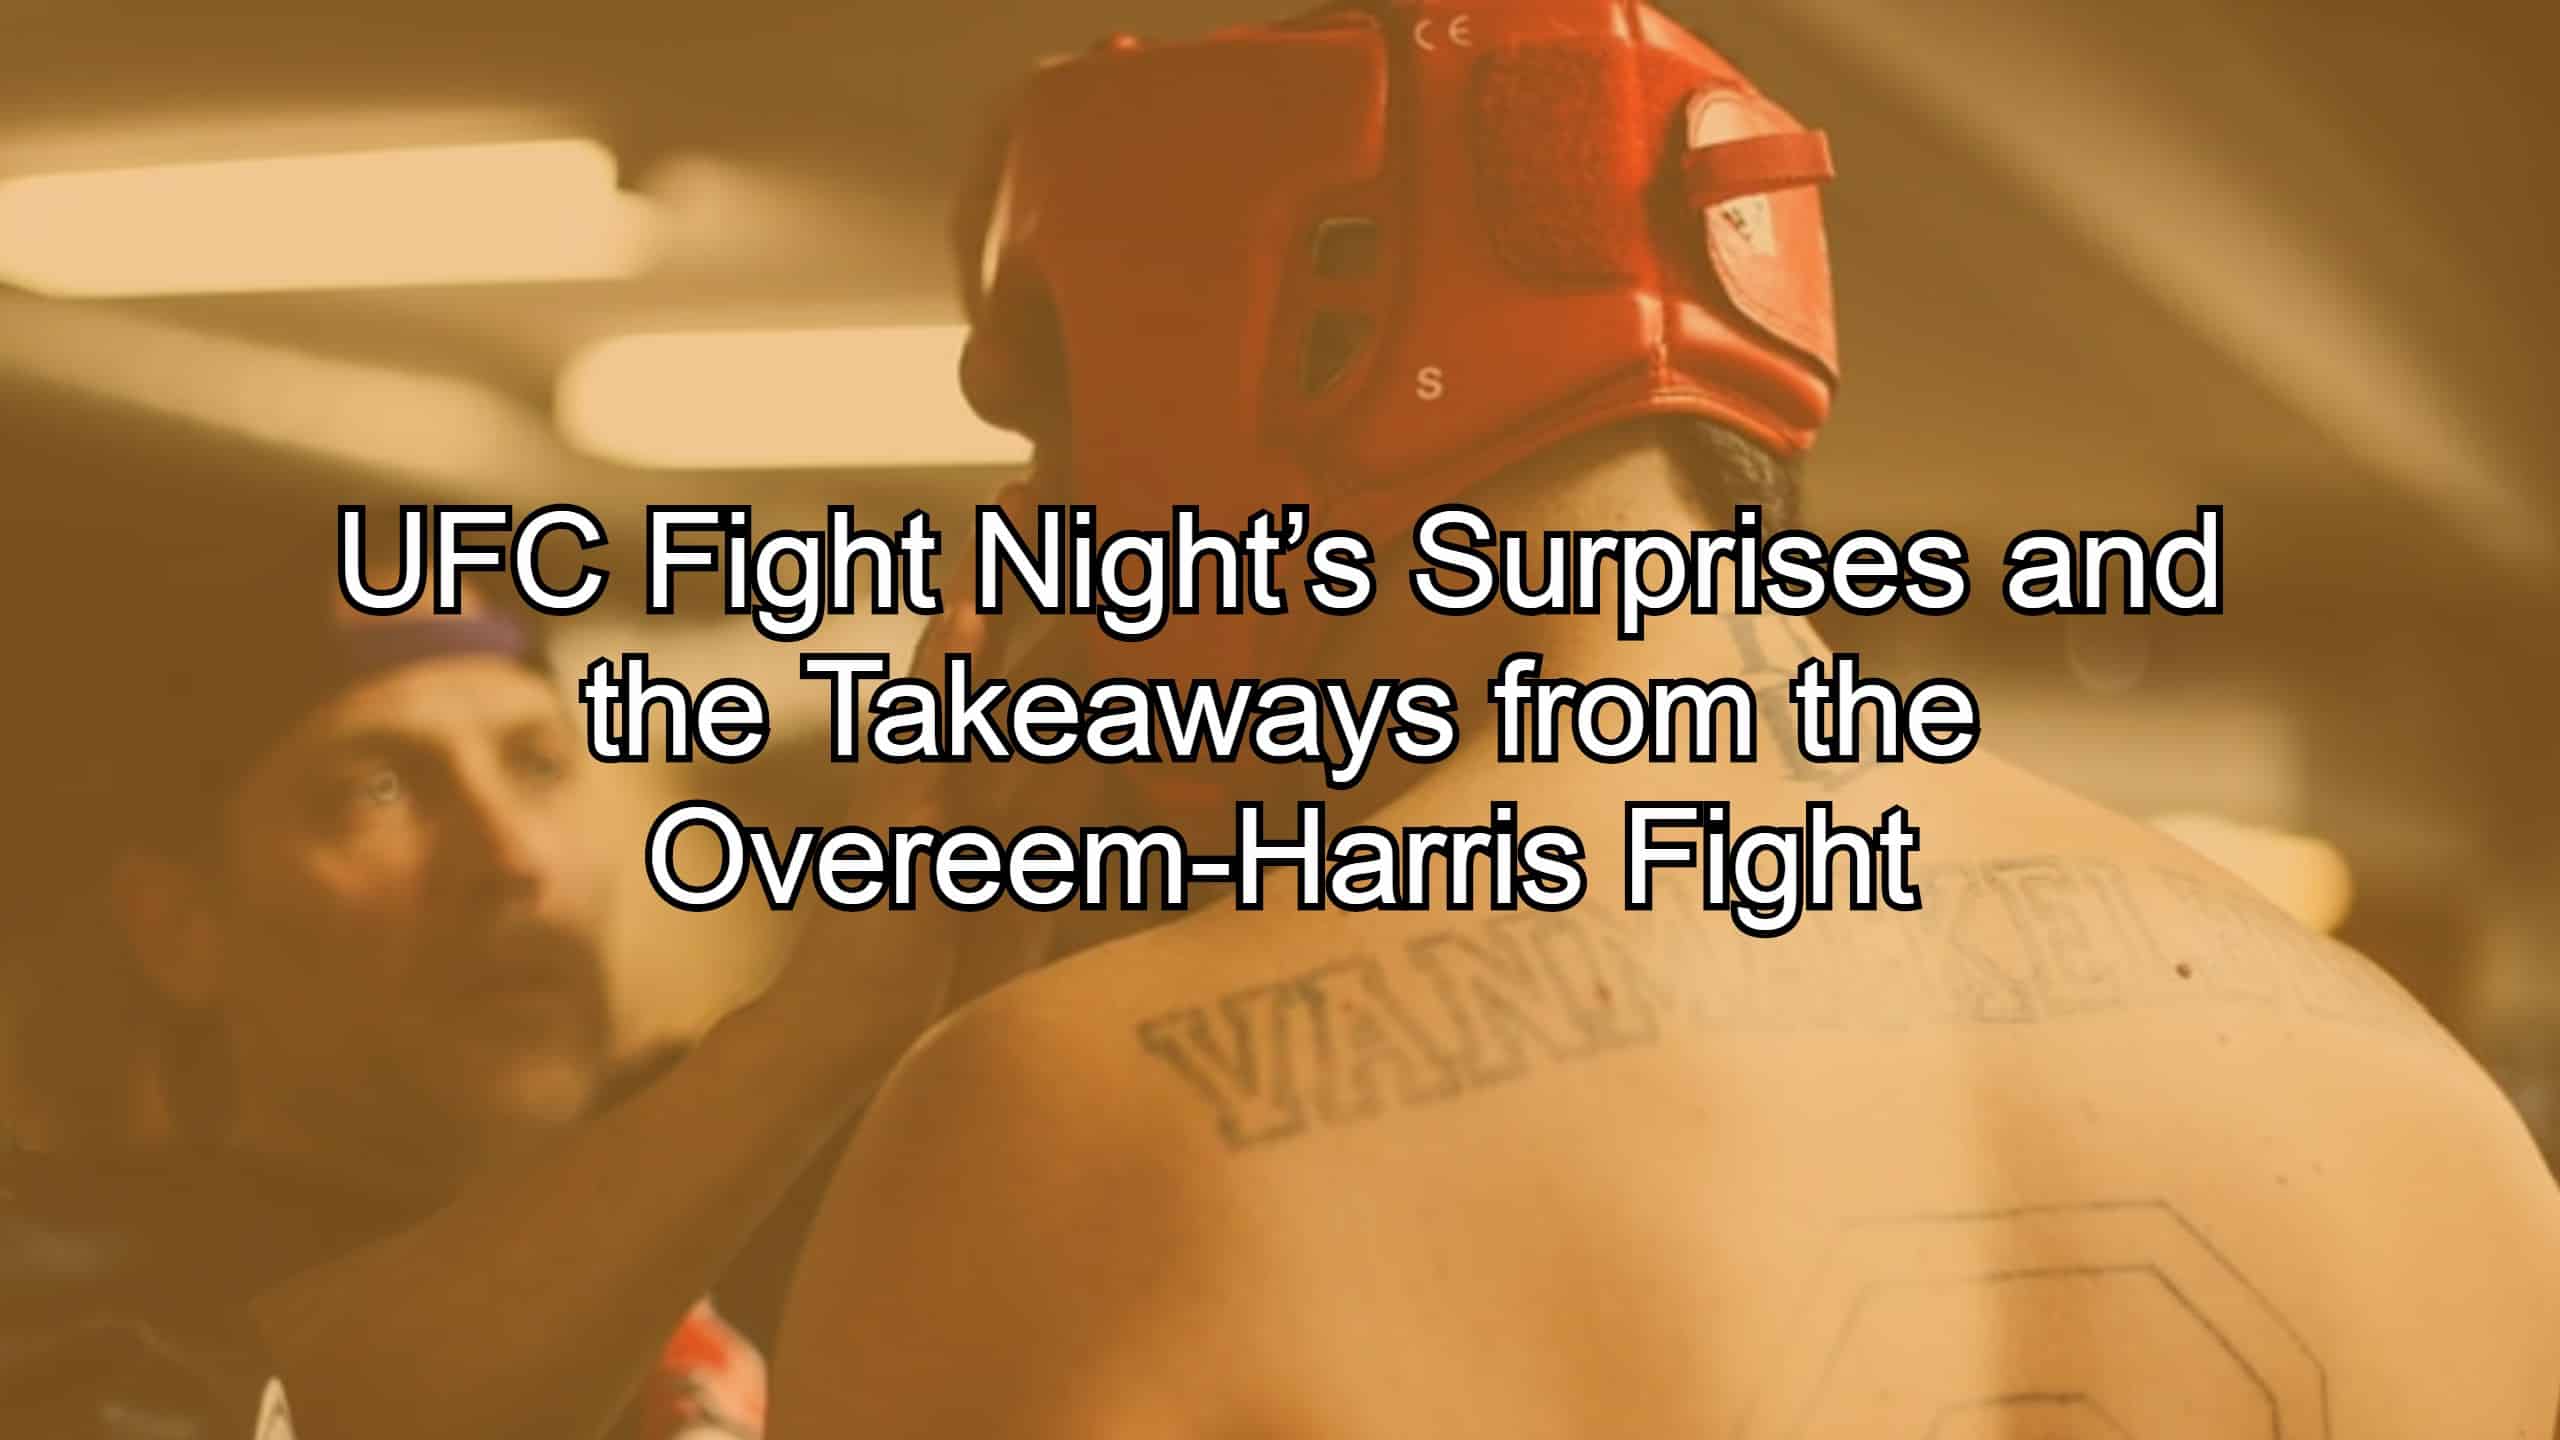 UFC Fight Night’s Surprises and the Takeaways from the Overeem-Harris Fight